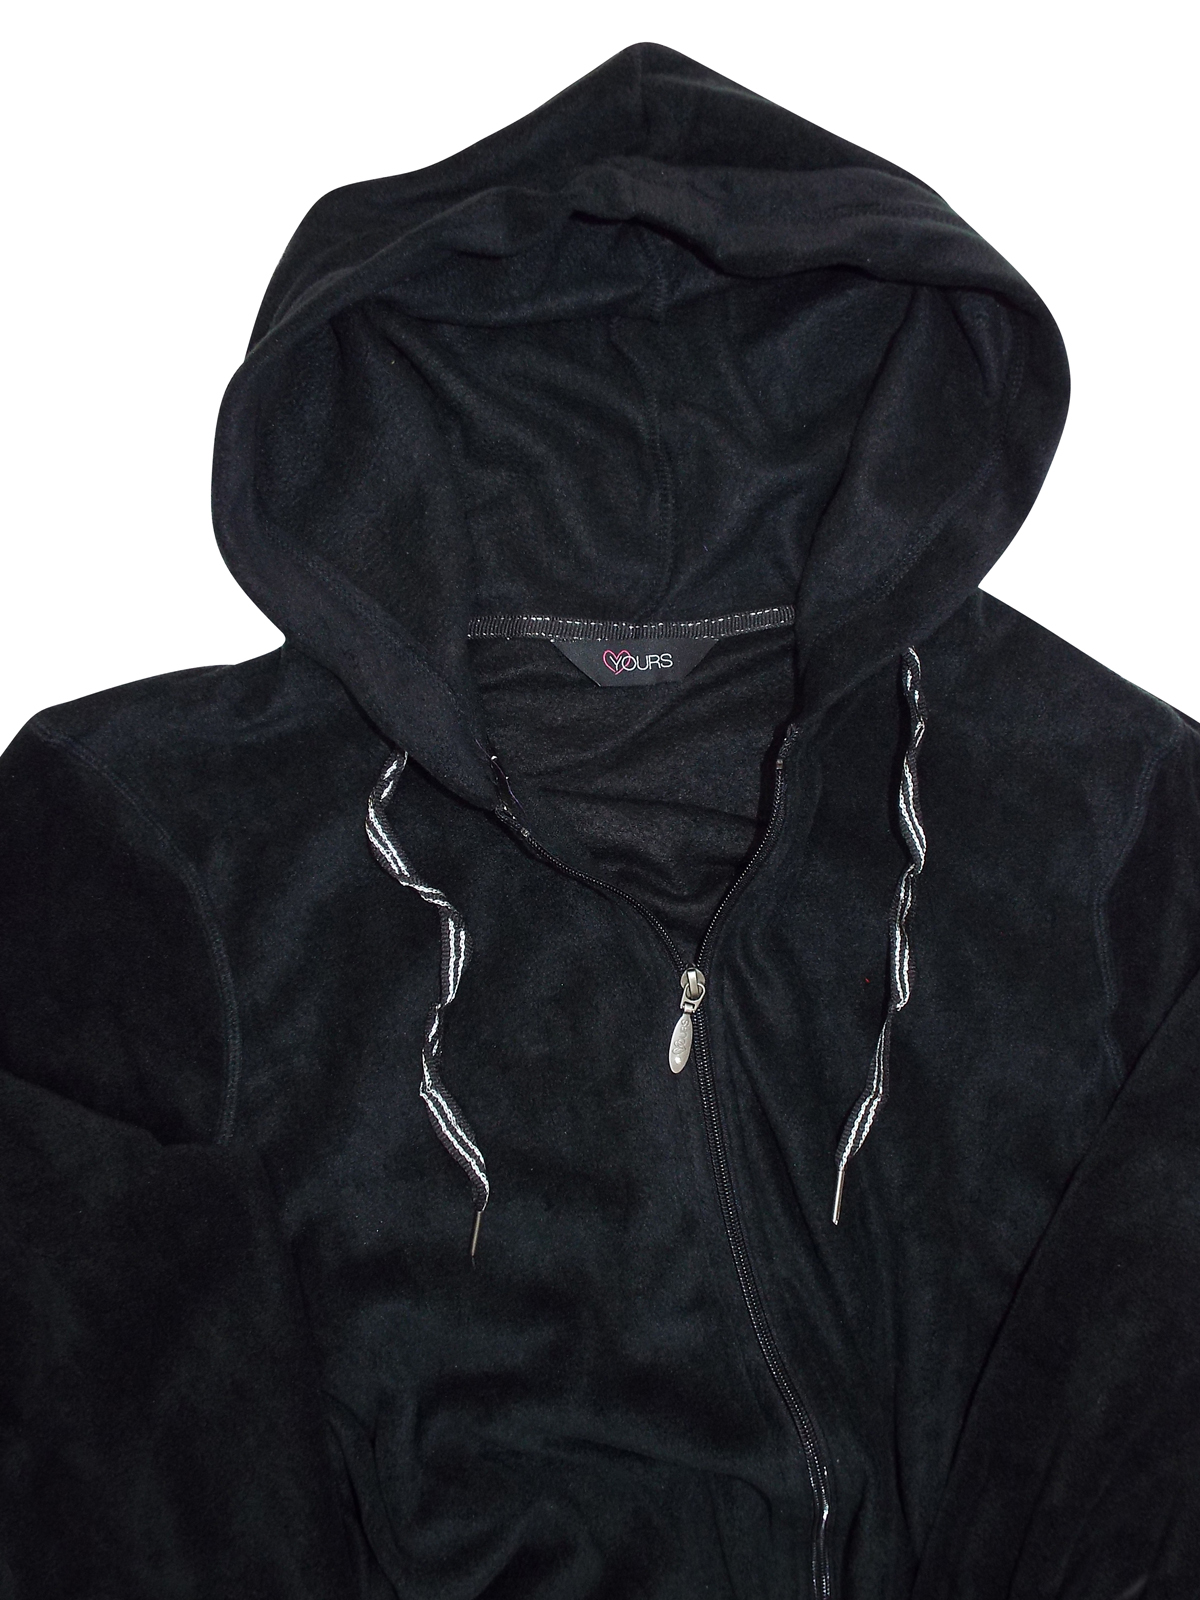 CURVE - - Yours BLACK Hooded Fleece Jacket - Plus Size 20 to 30/32